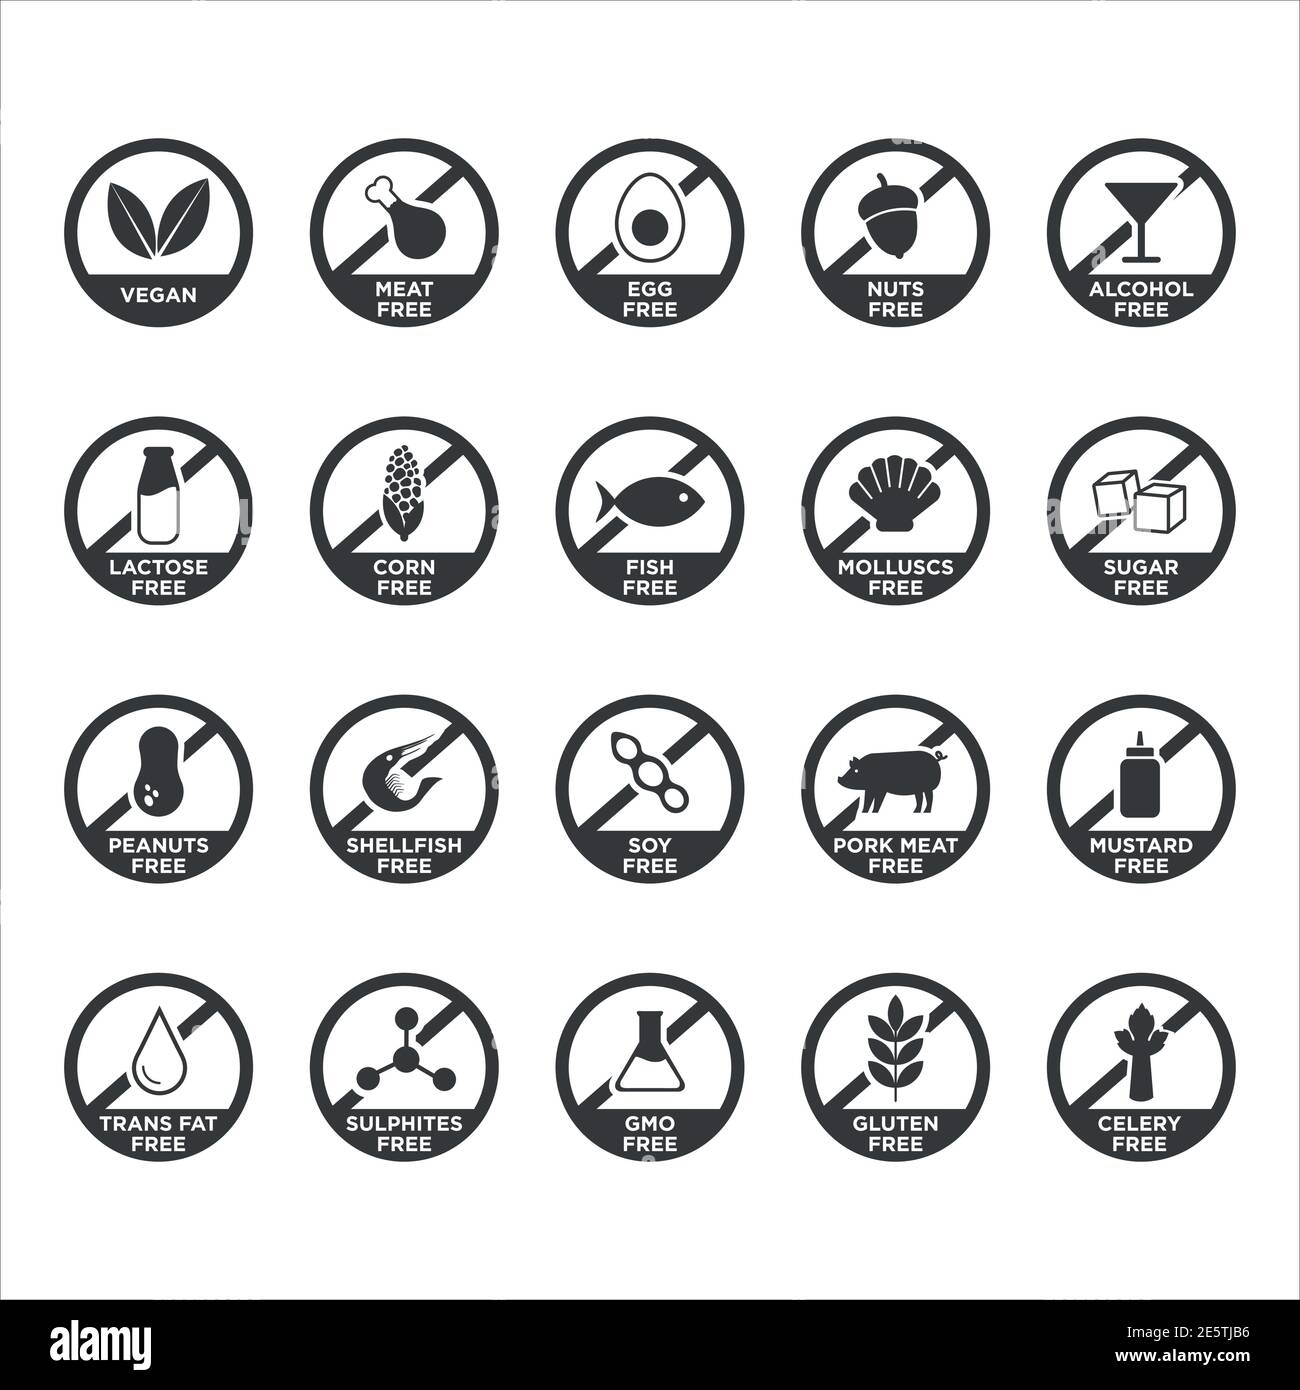 Allergen free icons set. Black and white. Vector illustration for restaurant menus and food products. Stock Vector